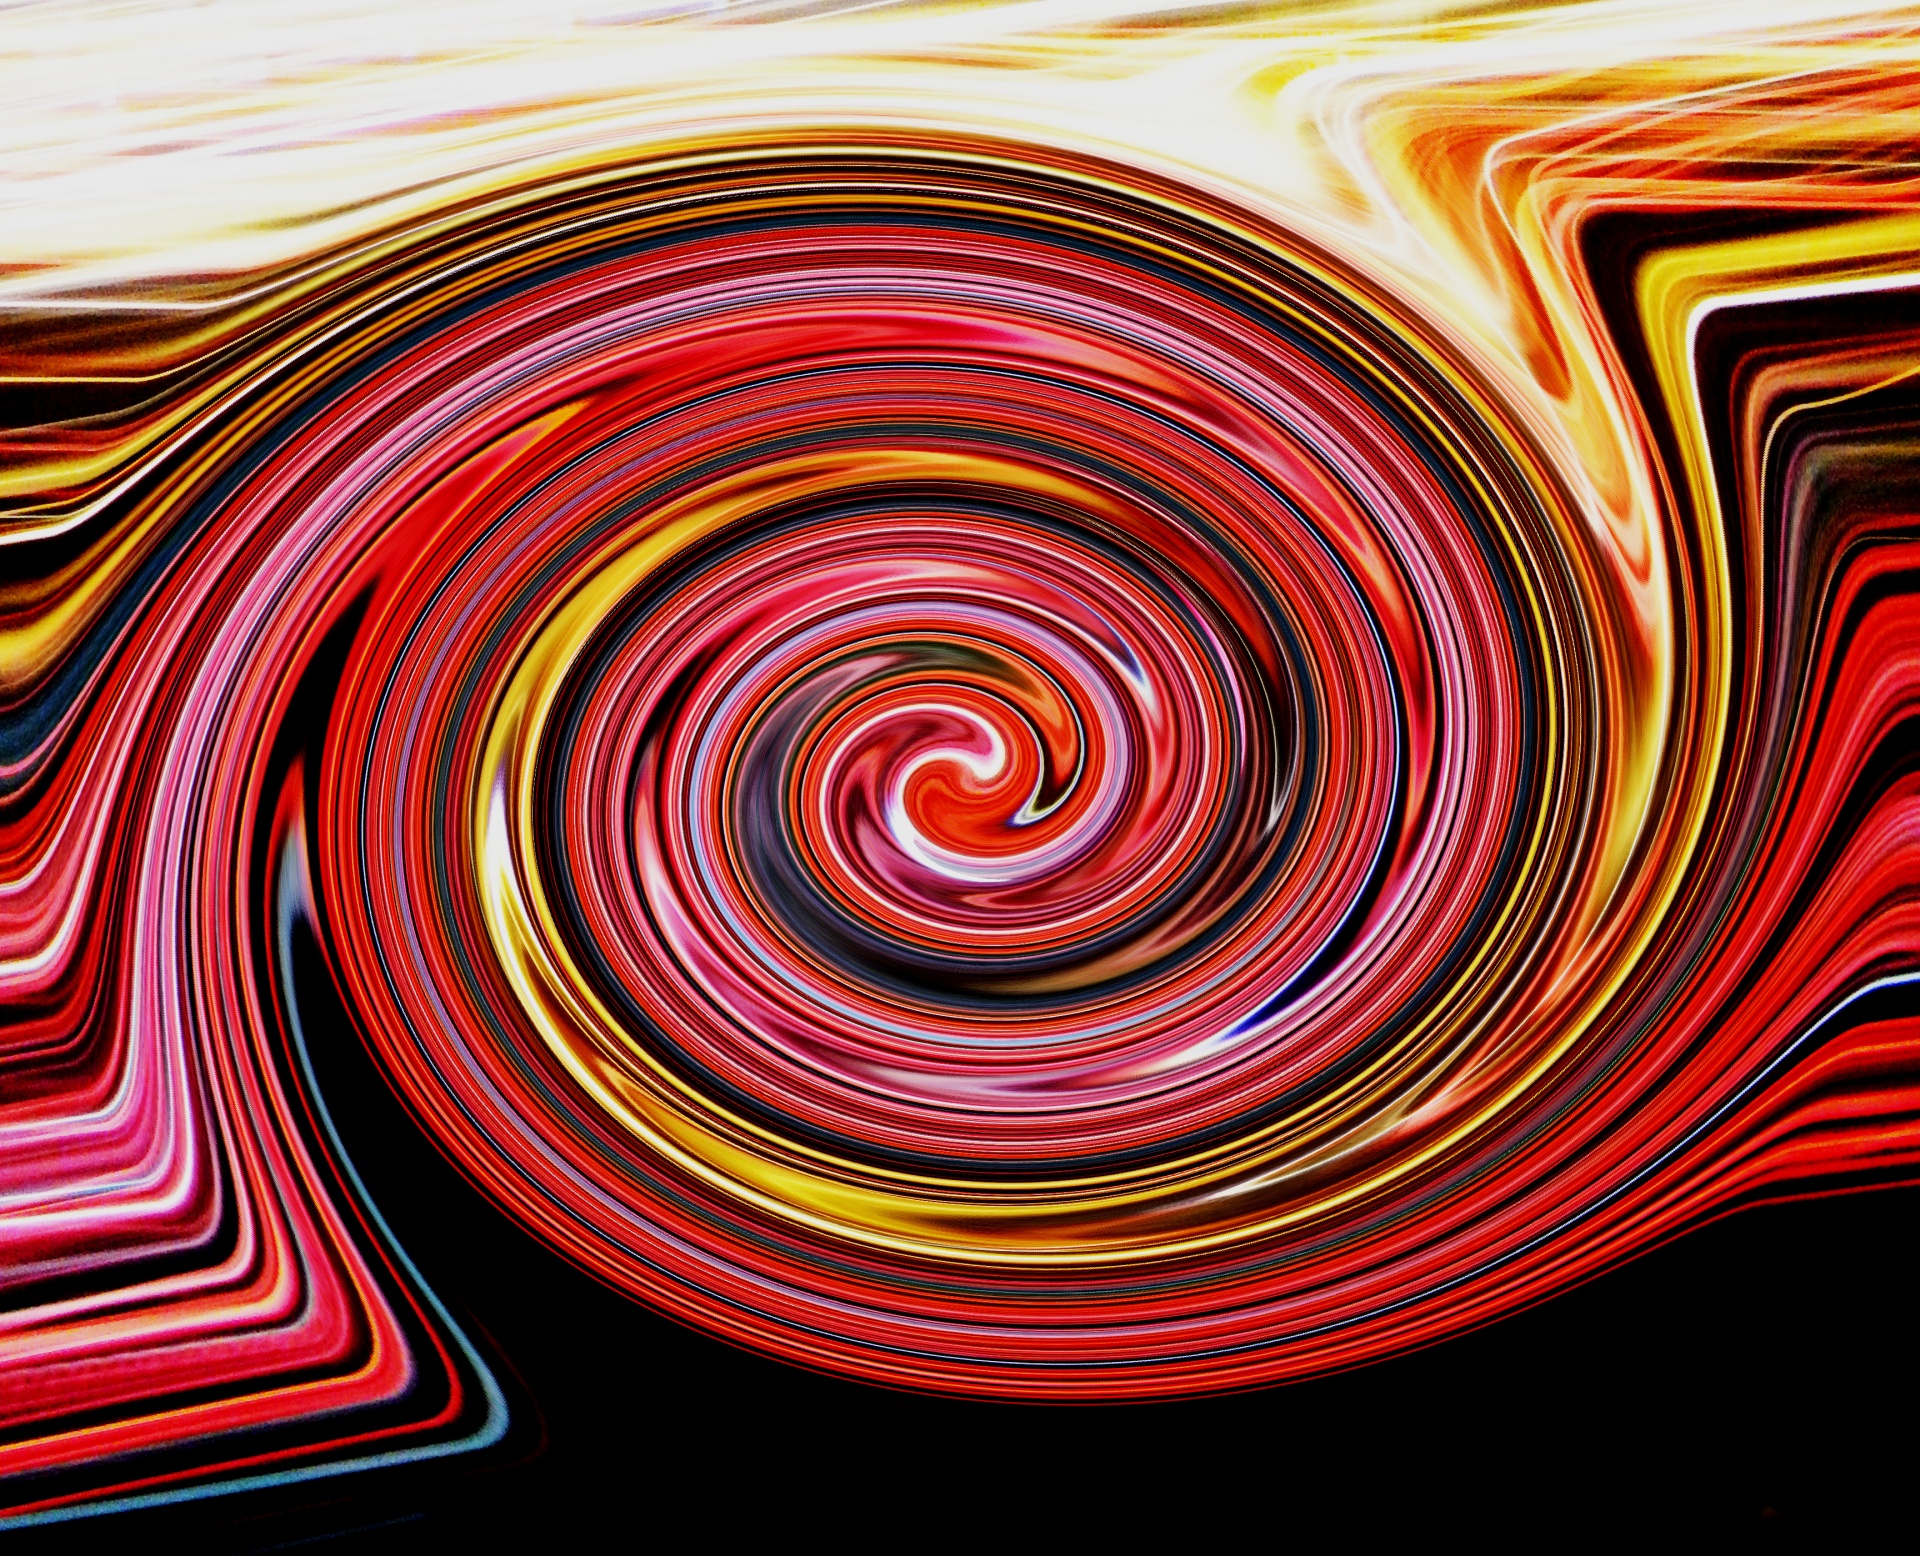 Abstract Red Light Spiral Pattern